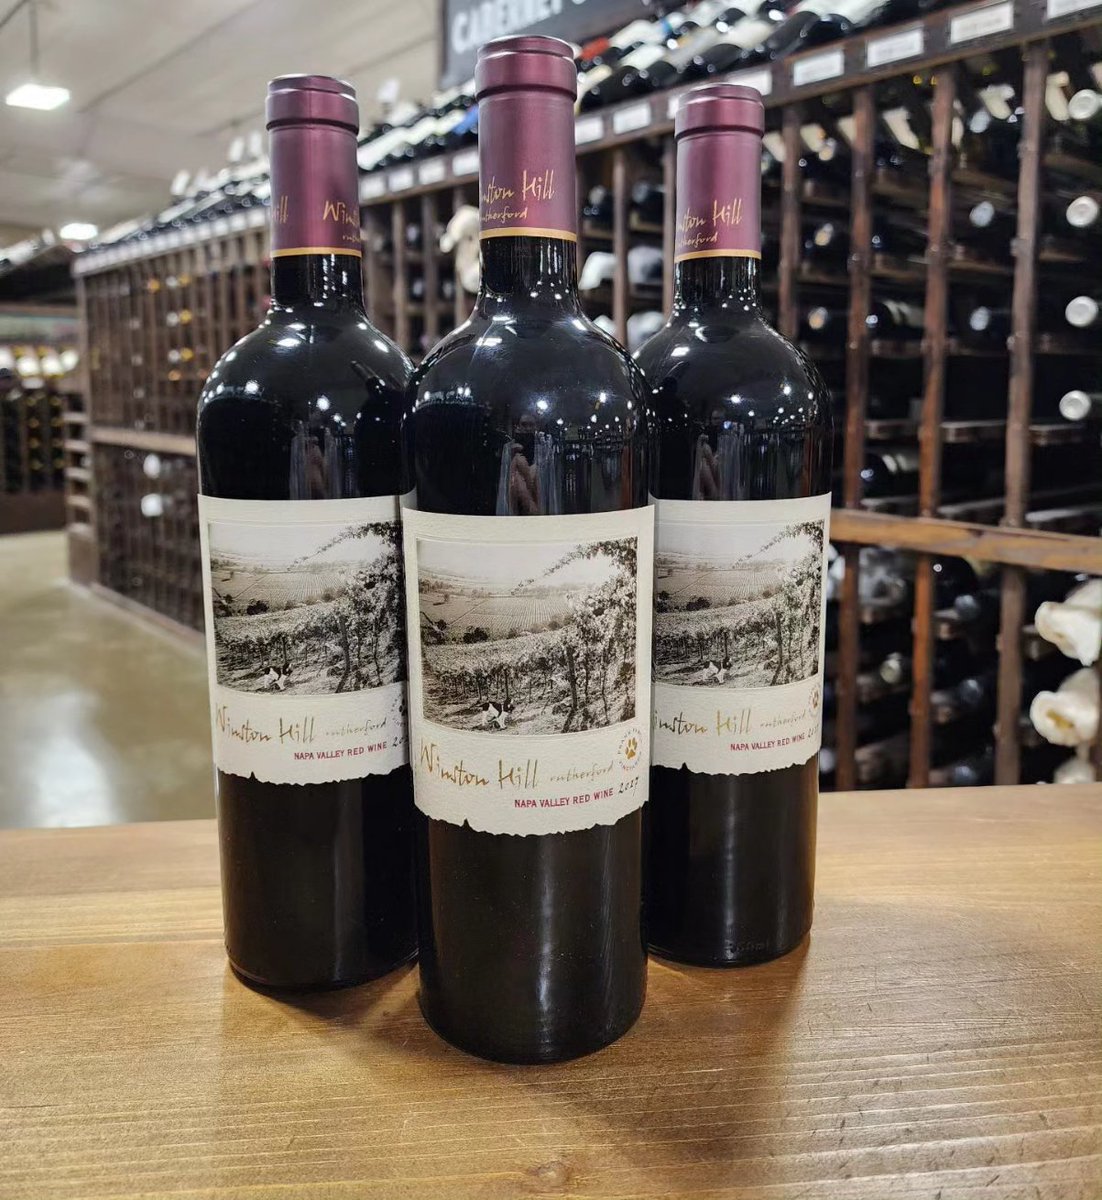 We are super excited to receive an allocation of @FrankFamilyWine 2017 Winston Hill Napa Valley red wine! This vintage is 93% cab, 4% merlot, 2% petit verdot, 1% cab franc. All of the grapes come from their prized 25 acre Winston Hill Vineyard. #CAwine #rutherford #napavalley